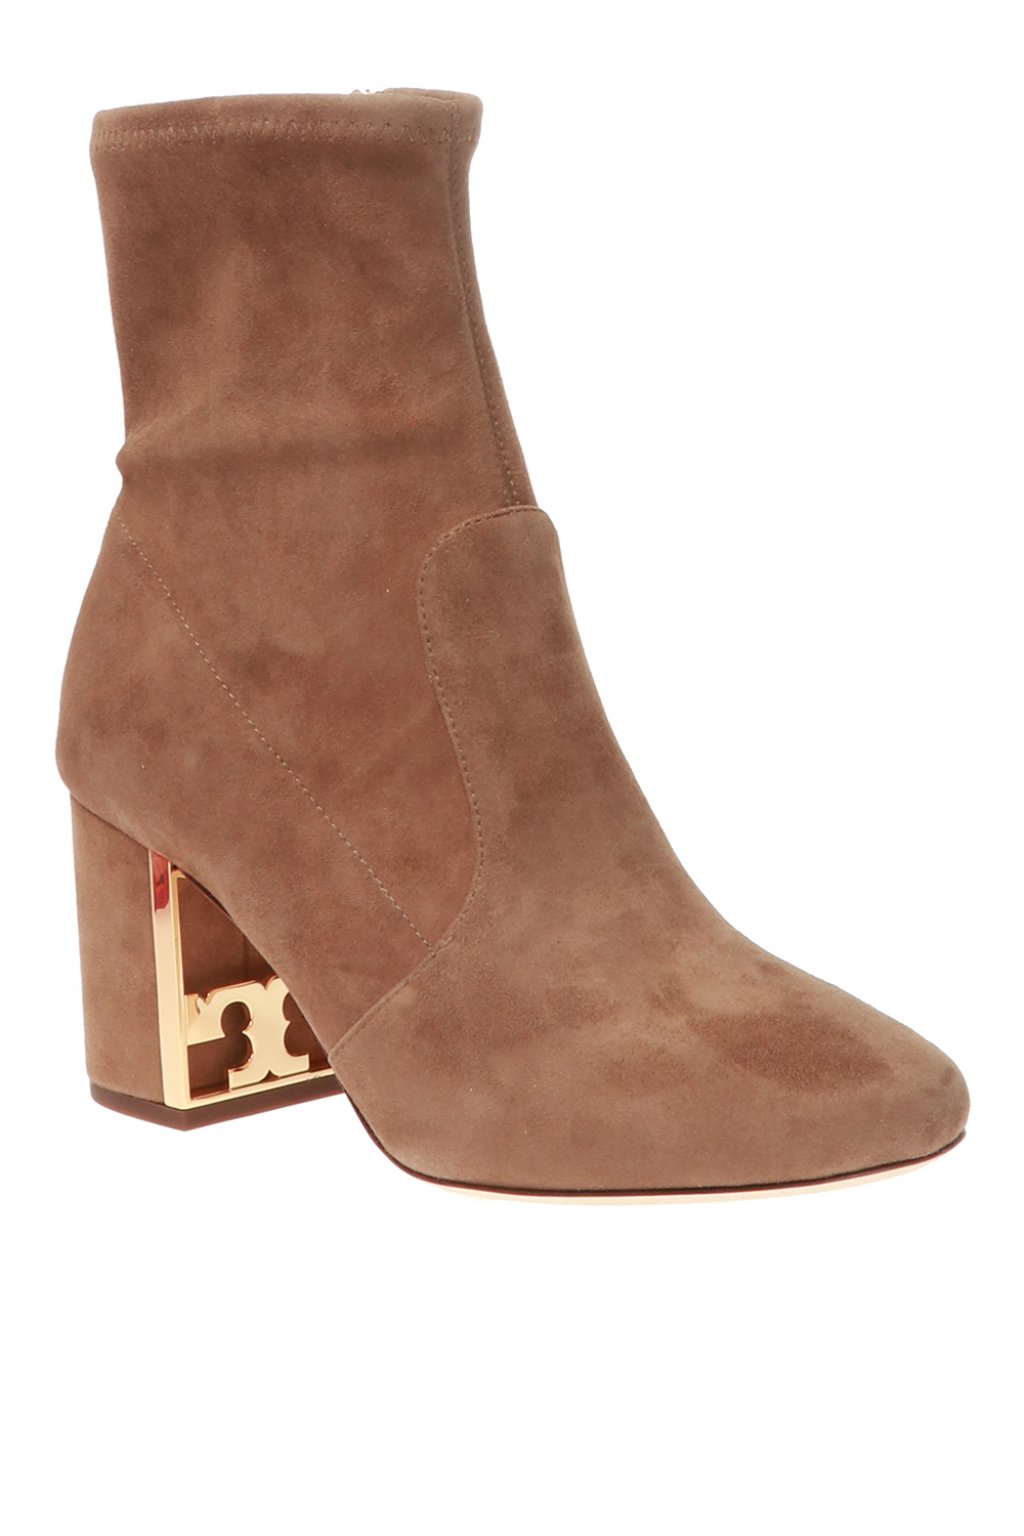 Brown 'Gigi' suede ankle boots Tory Burch - Vitkac TW